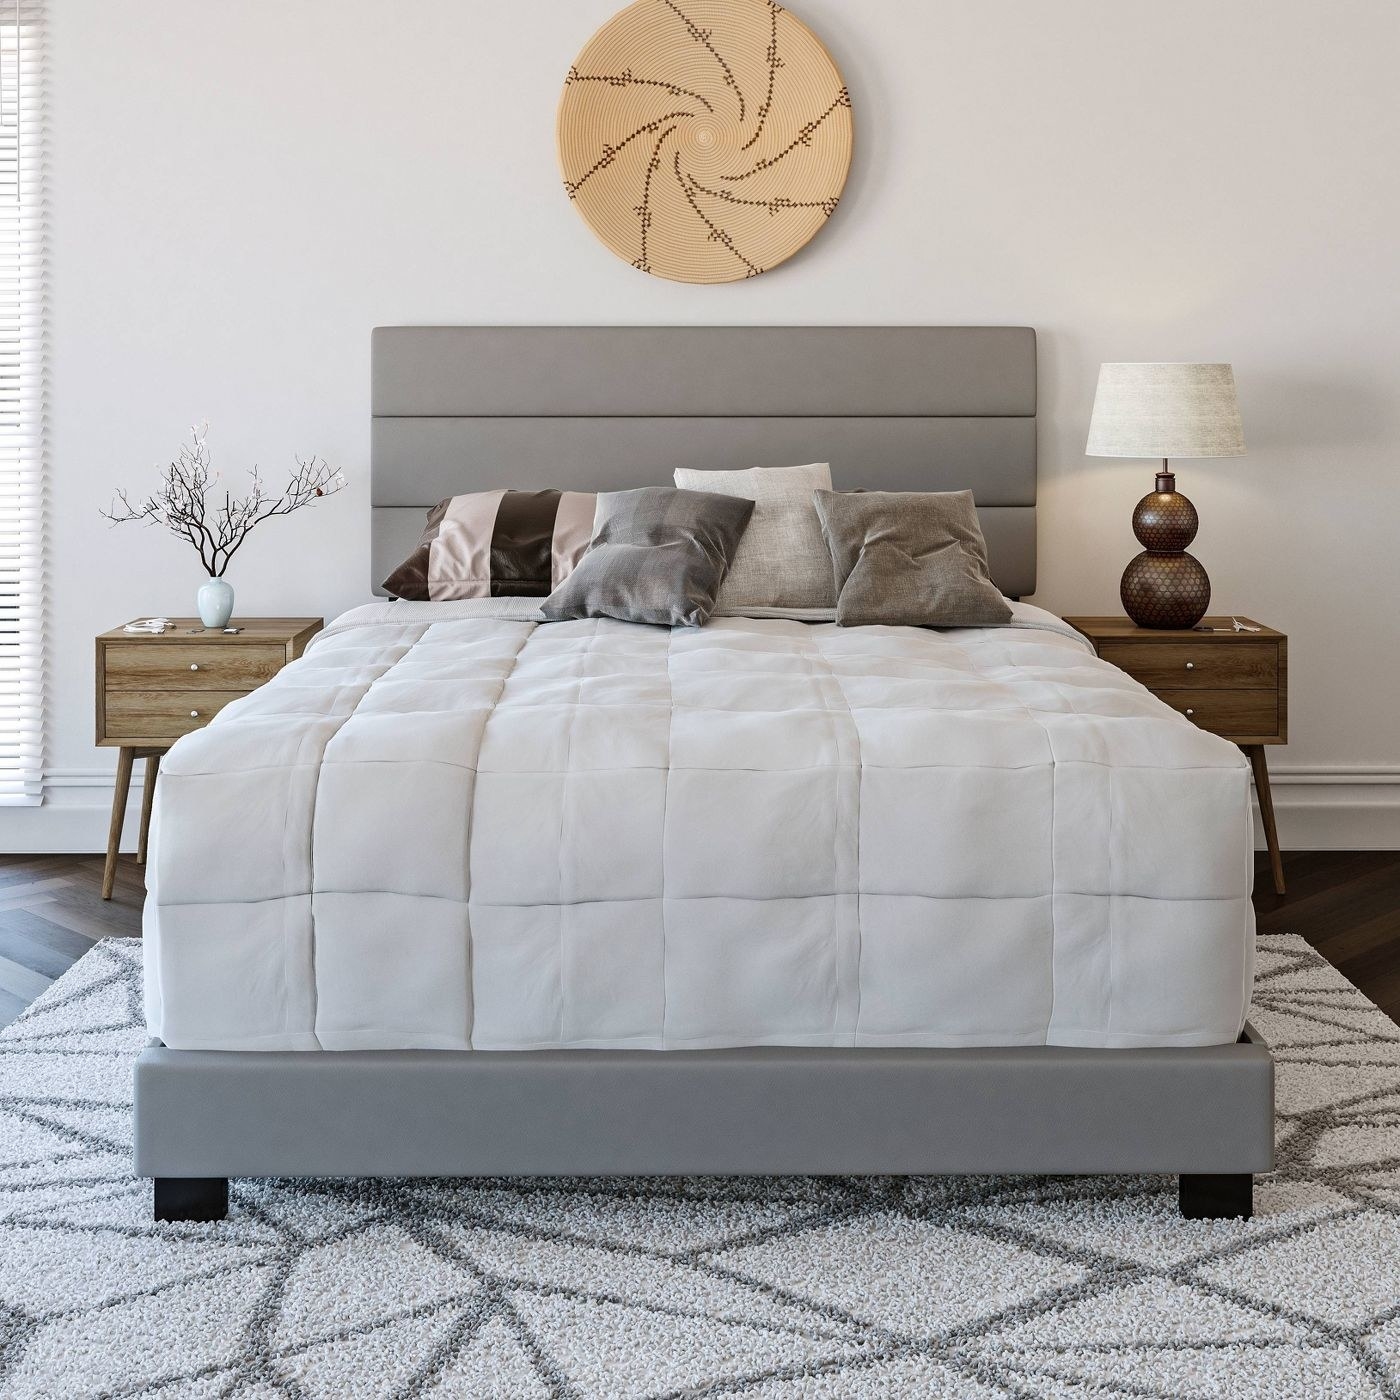 The gray faux leather upholstered platform bed